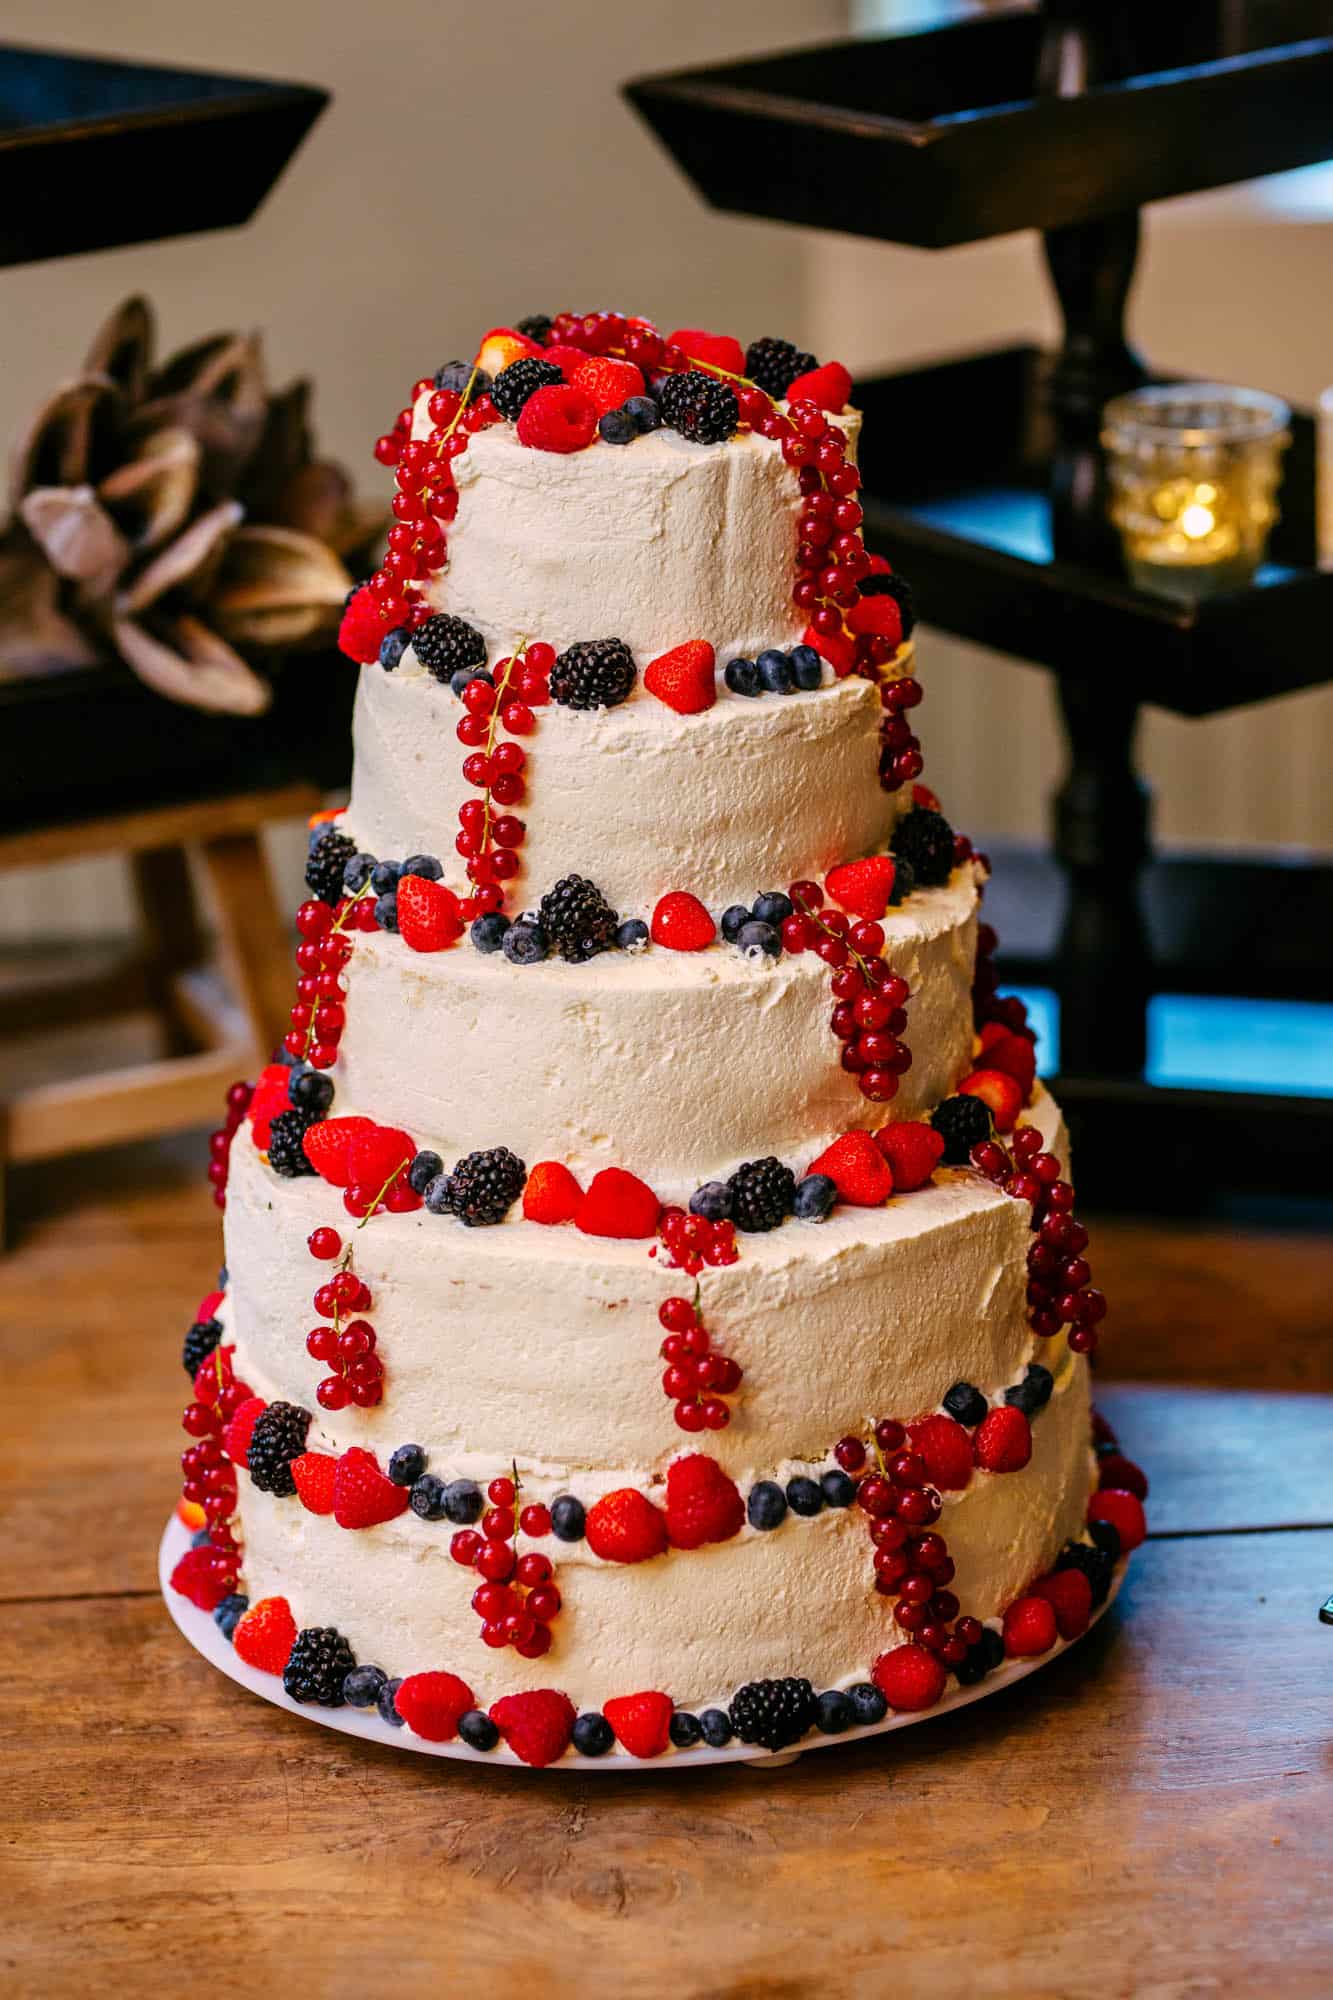 A wedding cake with three layers and berries on top, perfect for wedding cakes.